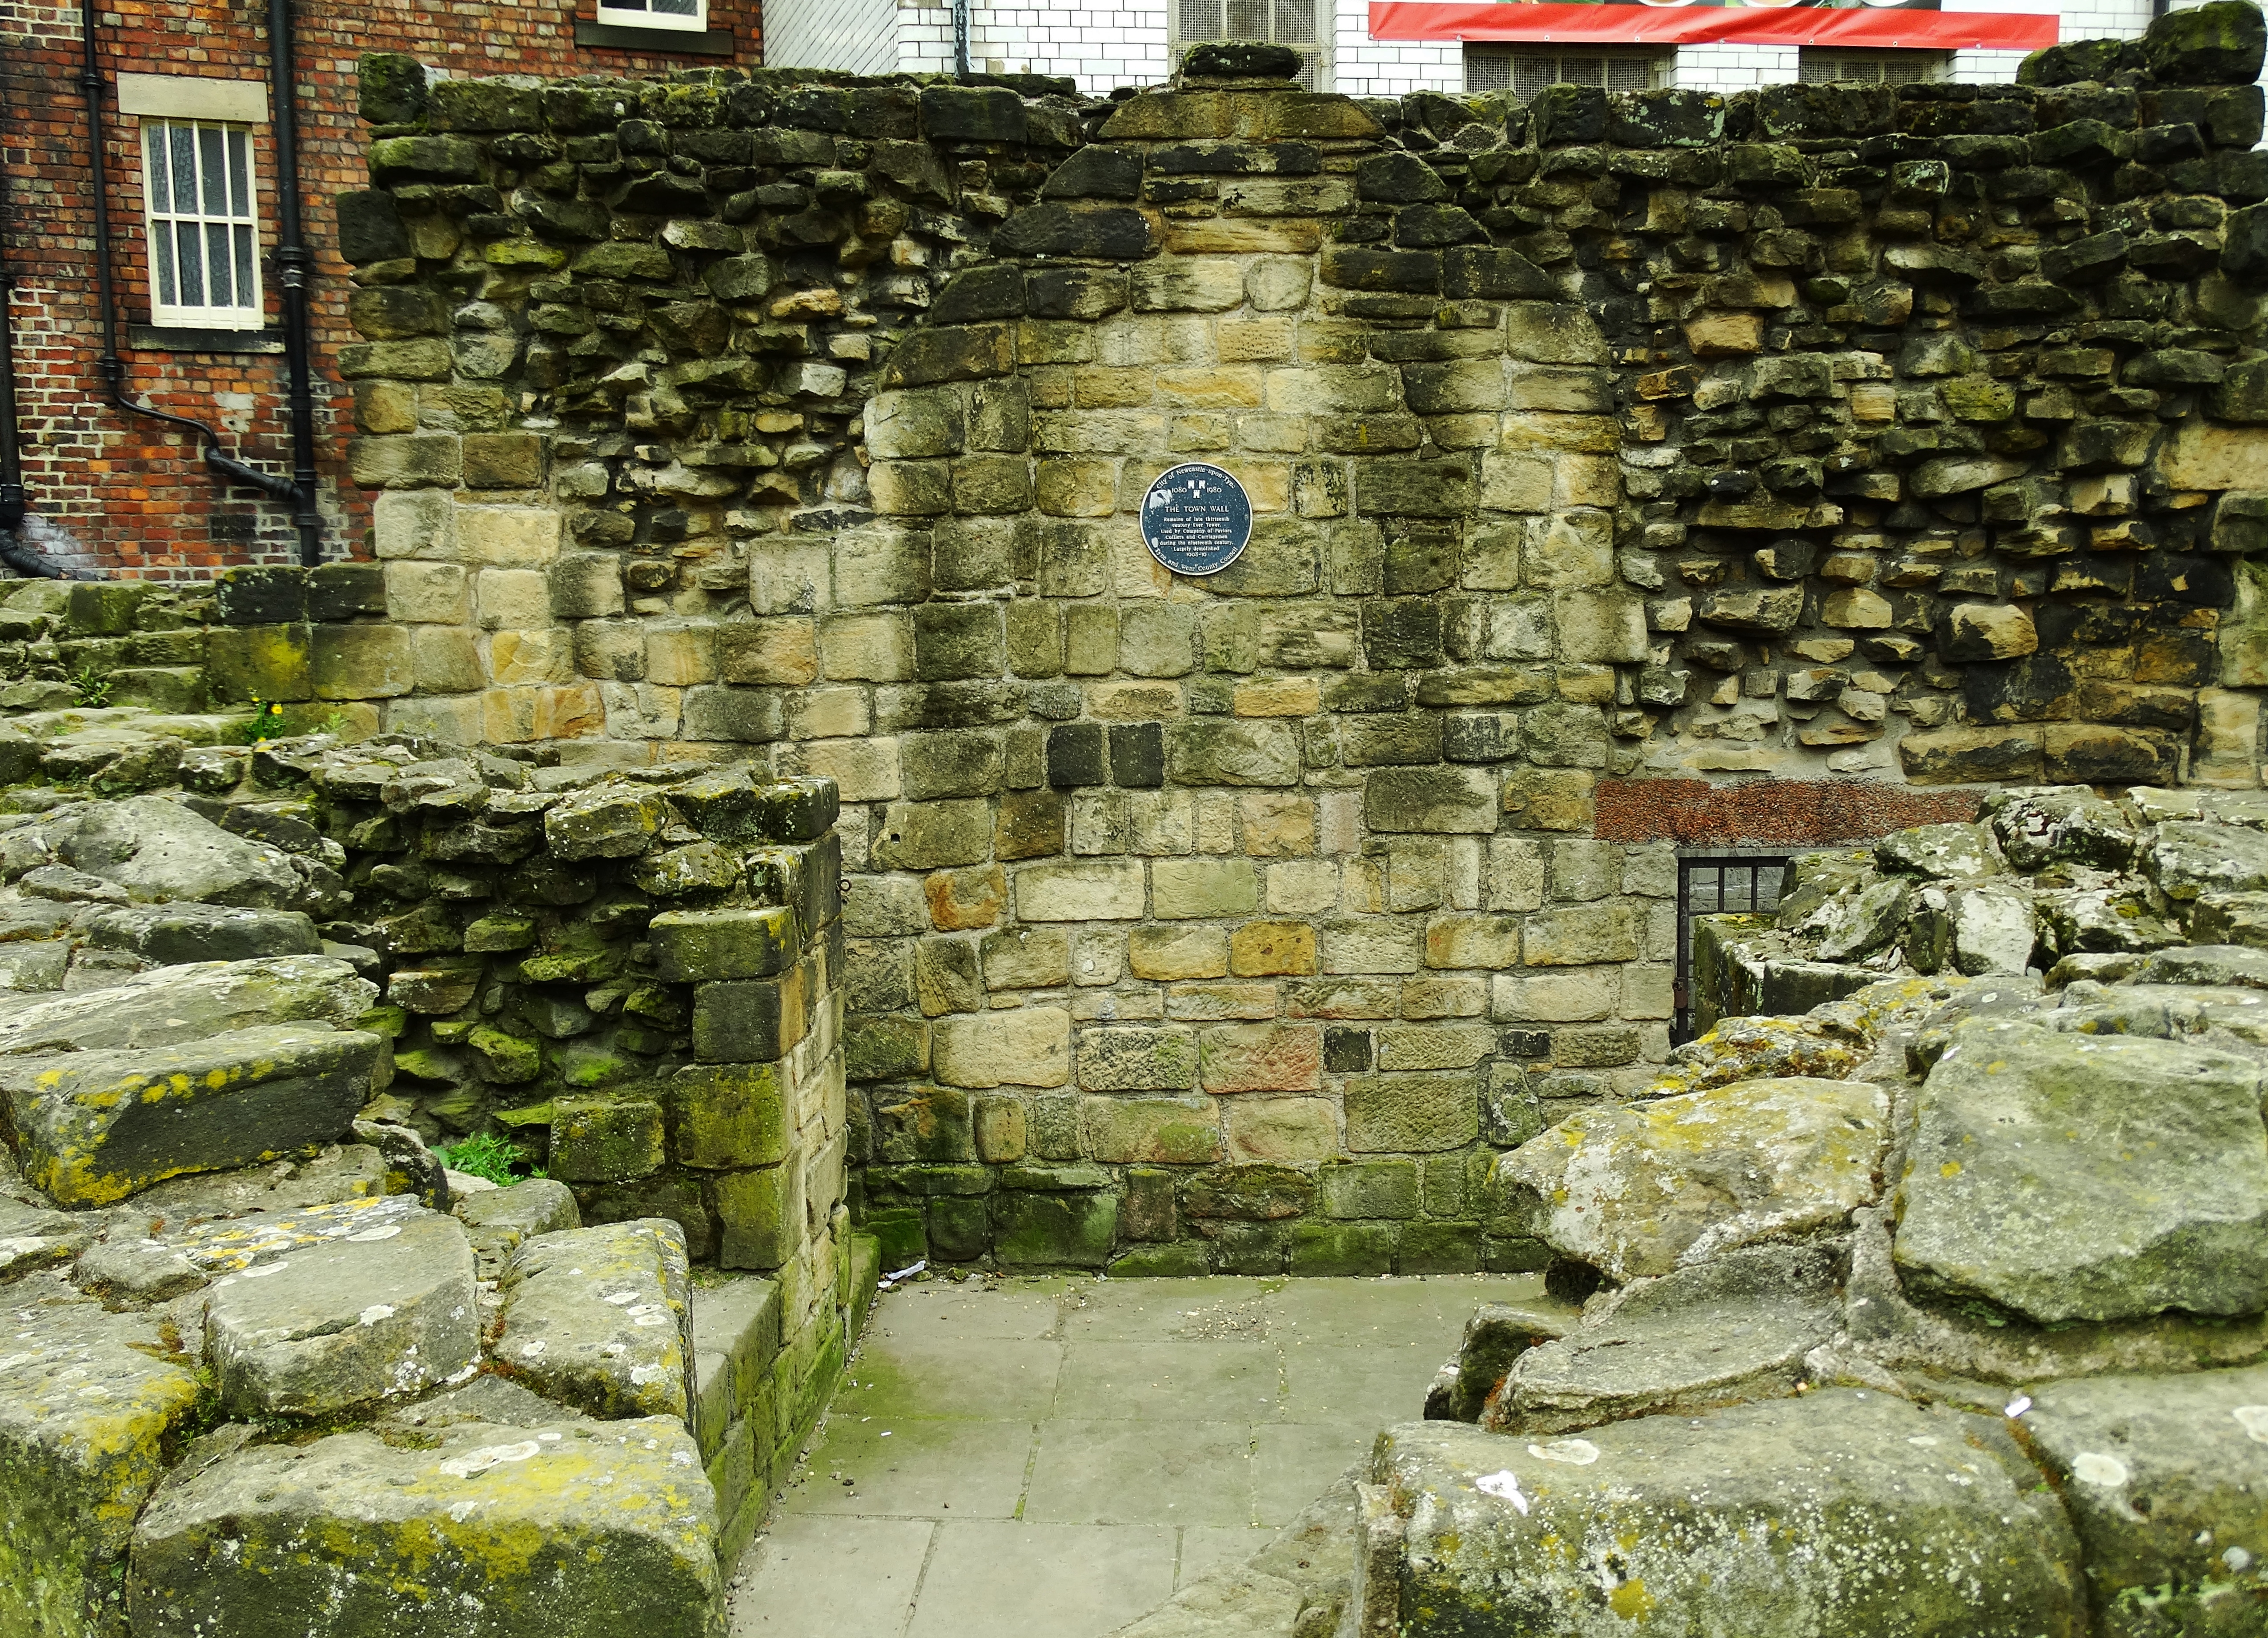 The Old City Wall, Newcastle. 13th Century